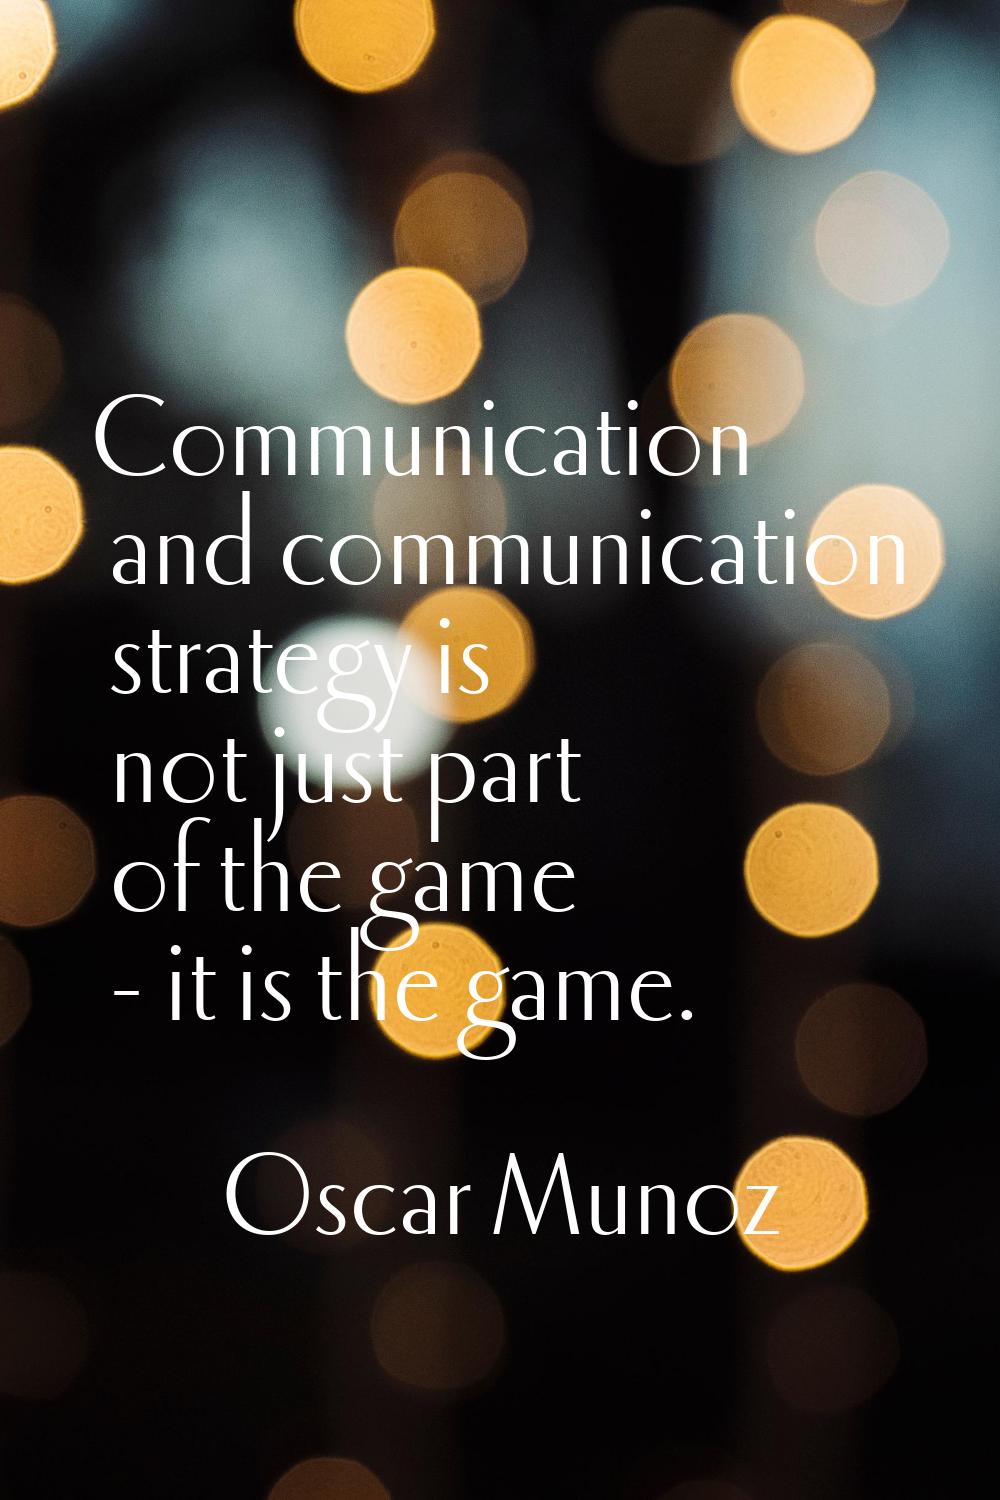 Communication and communication strategy is not just part of the game - it is the game.